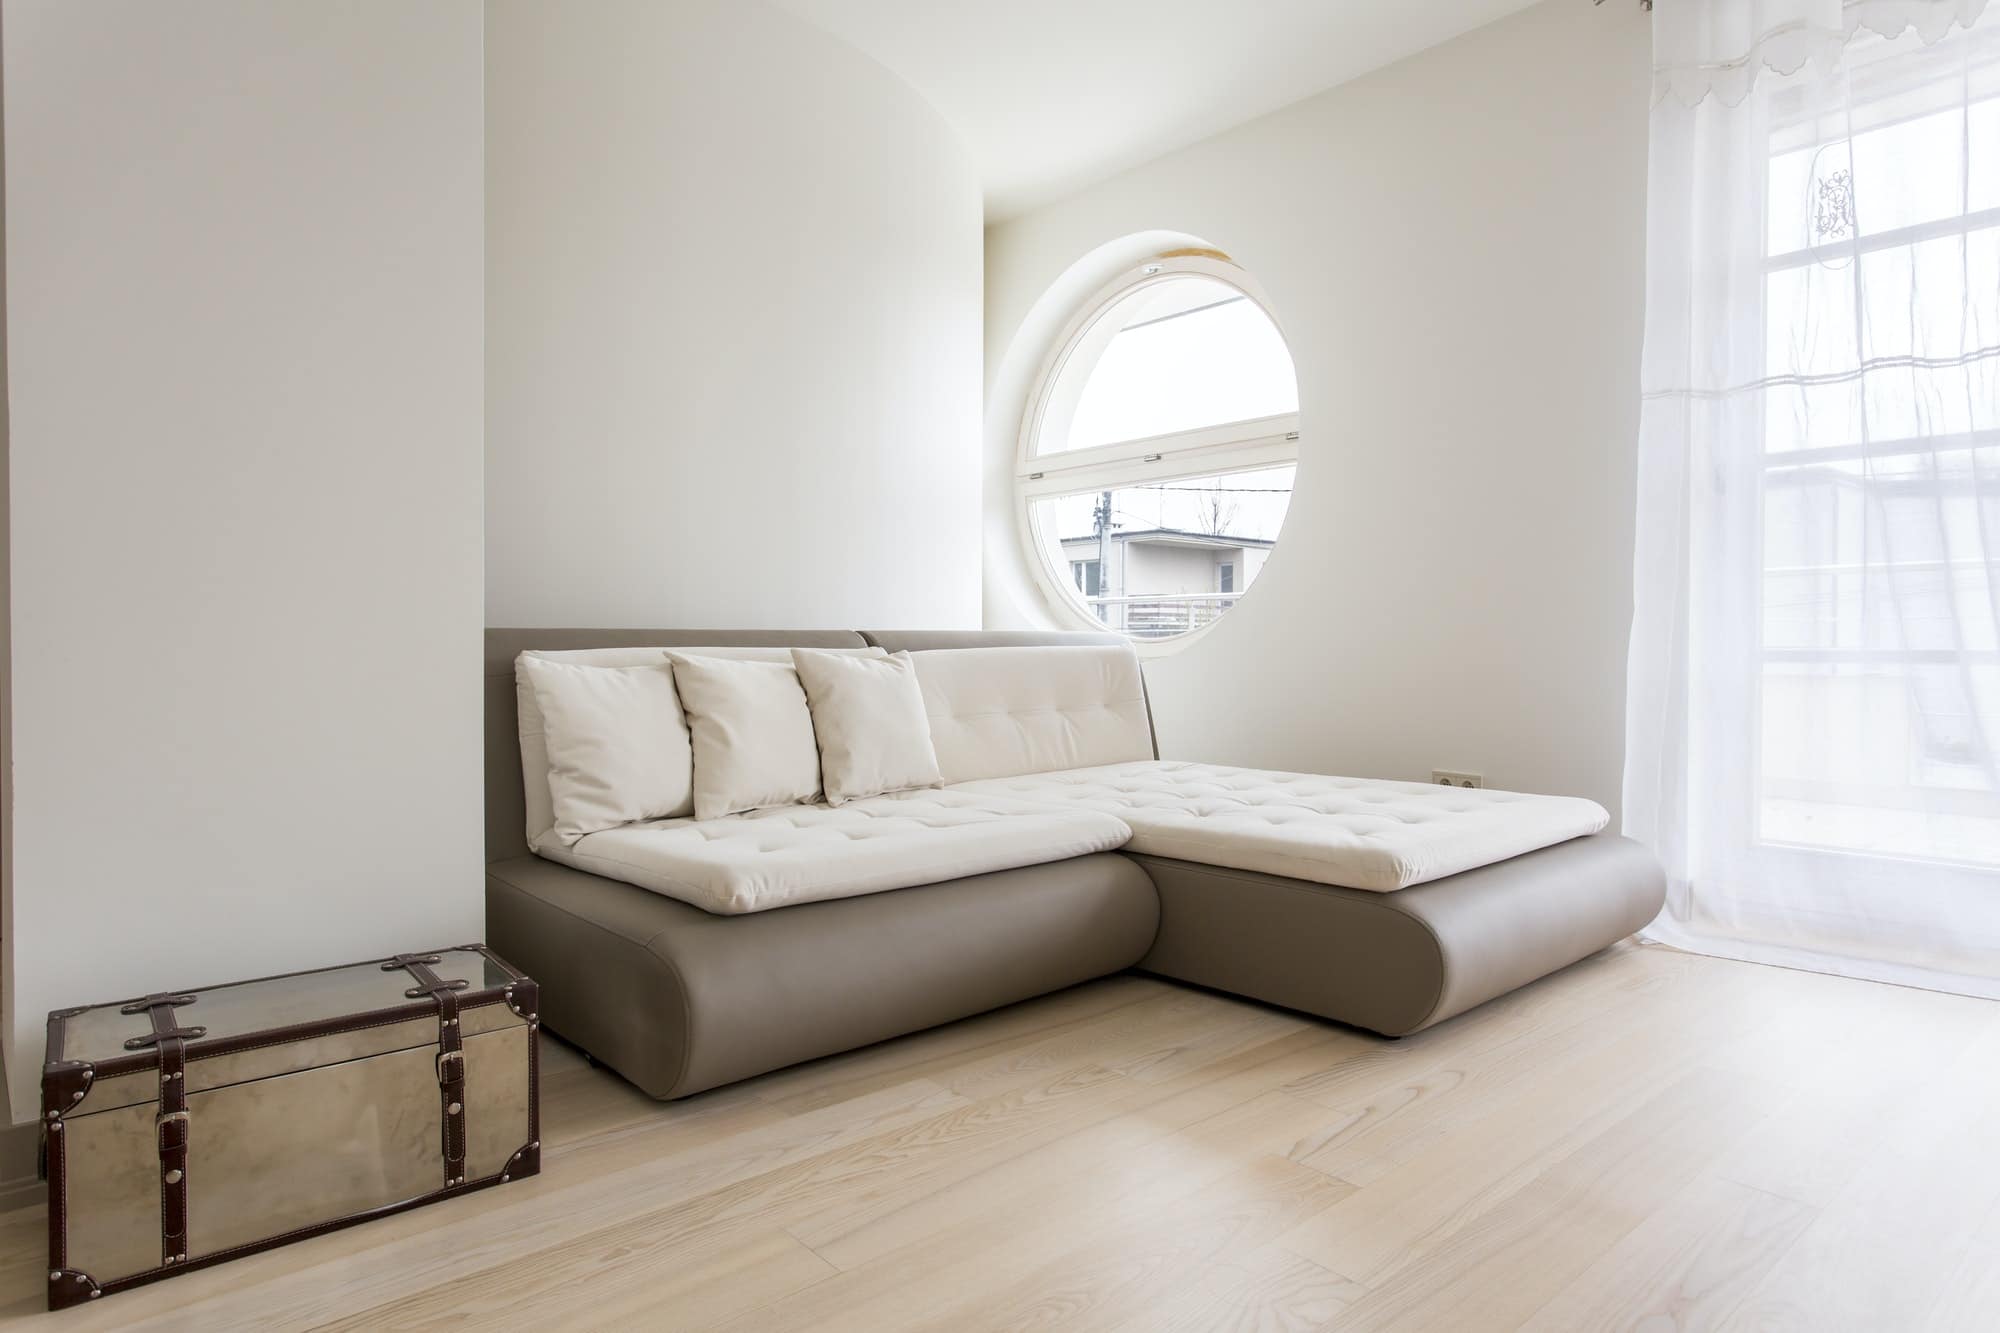 Sofa Bed Ing Guide, How To Choose A Good Sofa Bed